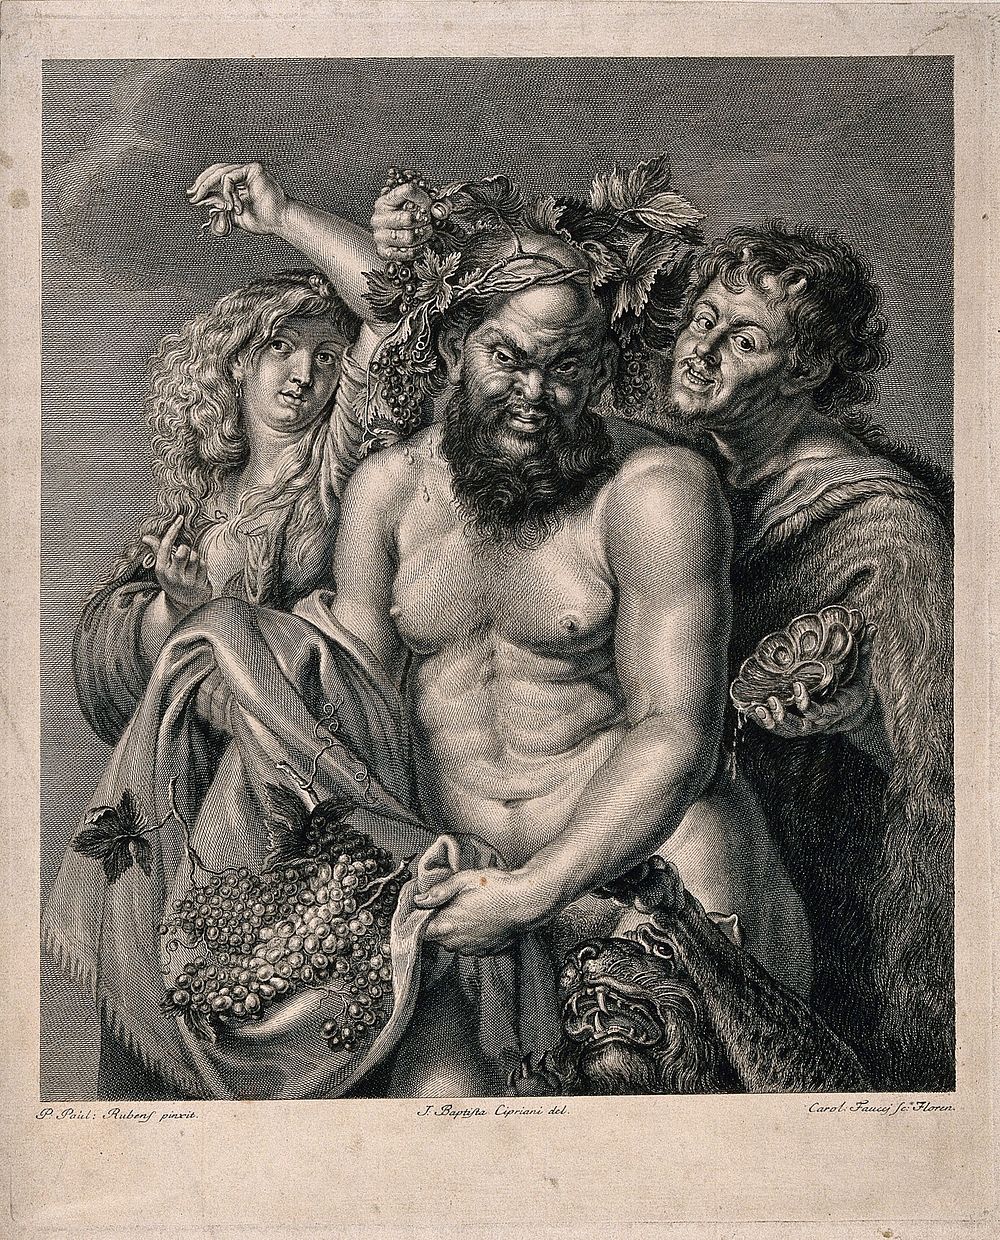 Silenus, holding grapes and crowned with vines, flanked by a maenad and a faun. Engraving by C. Faucci, c. 1768, after G. B.…